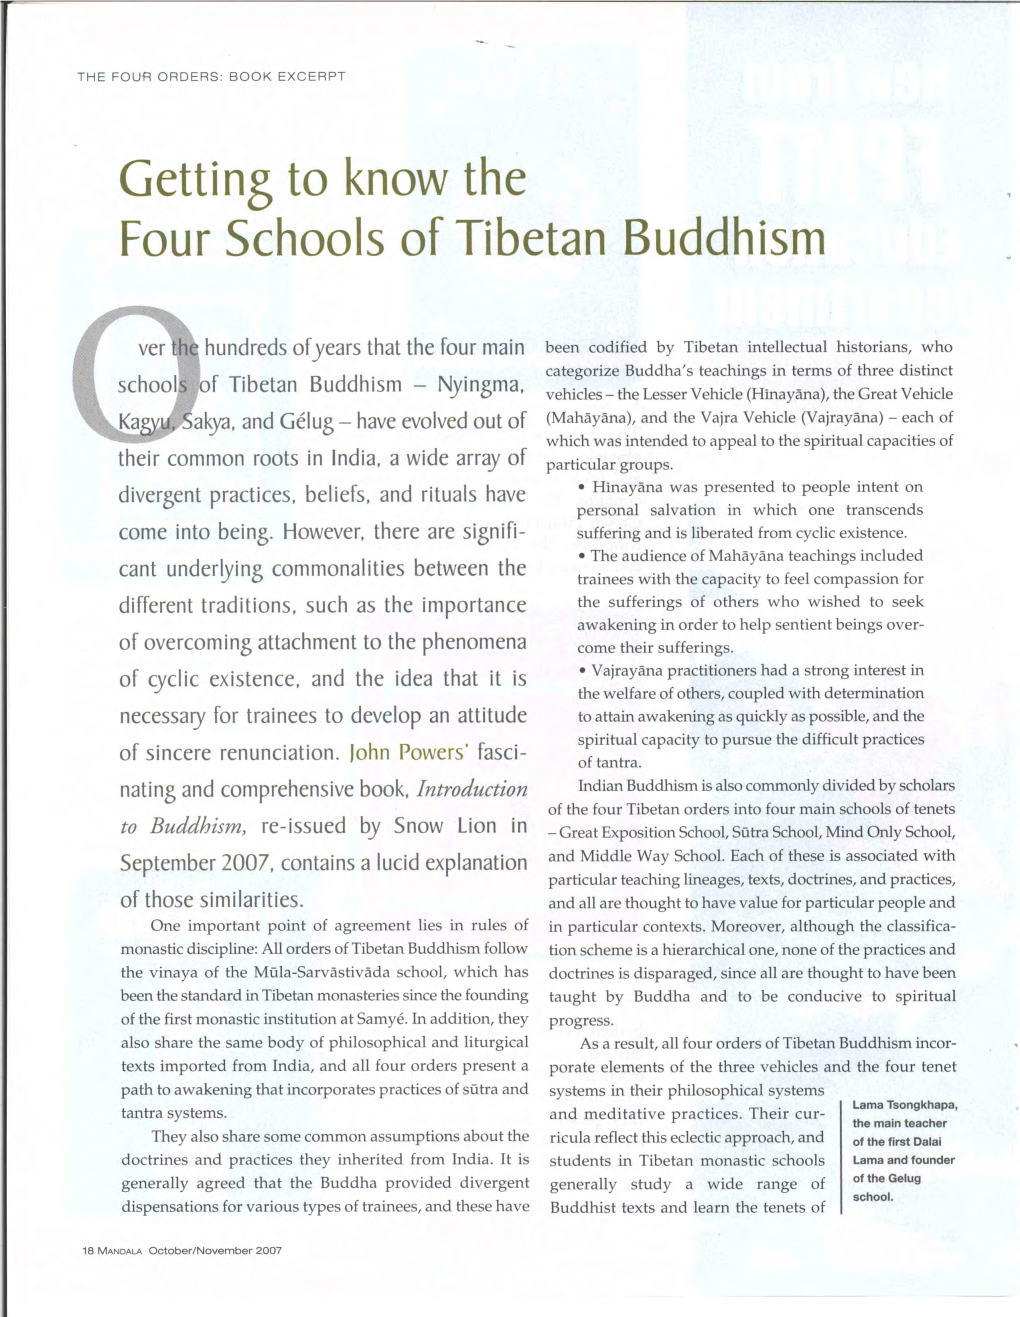 Getting to Know the Four Schools of Tibetan Buddhism